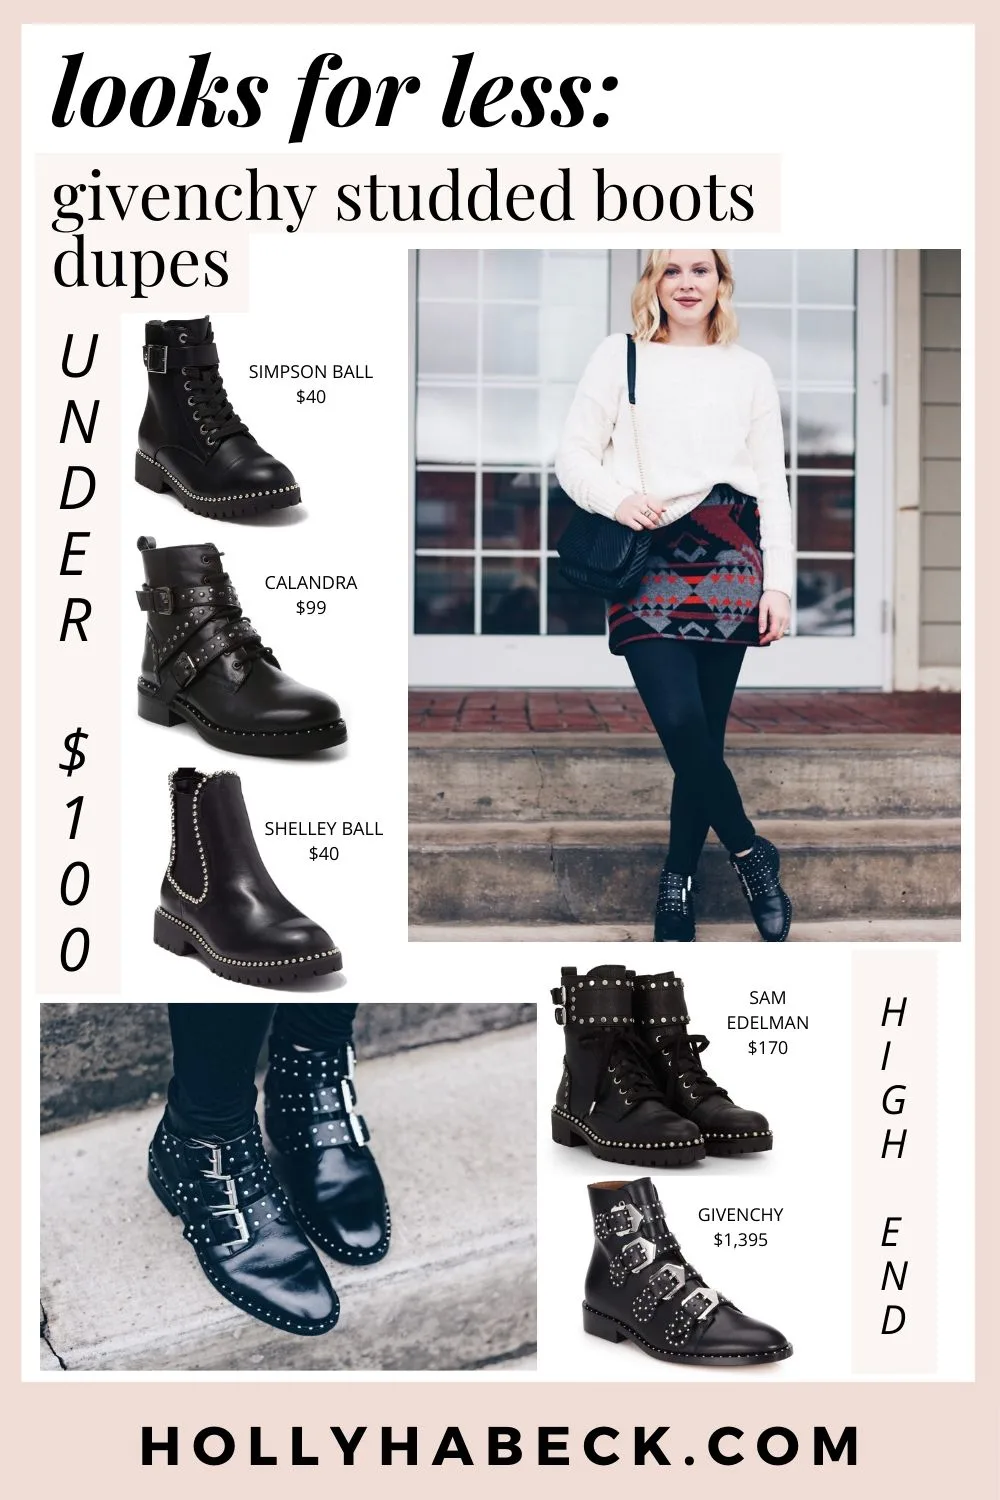 Givenchy Studded Boots Dupe: Lookalike Styes for Less